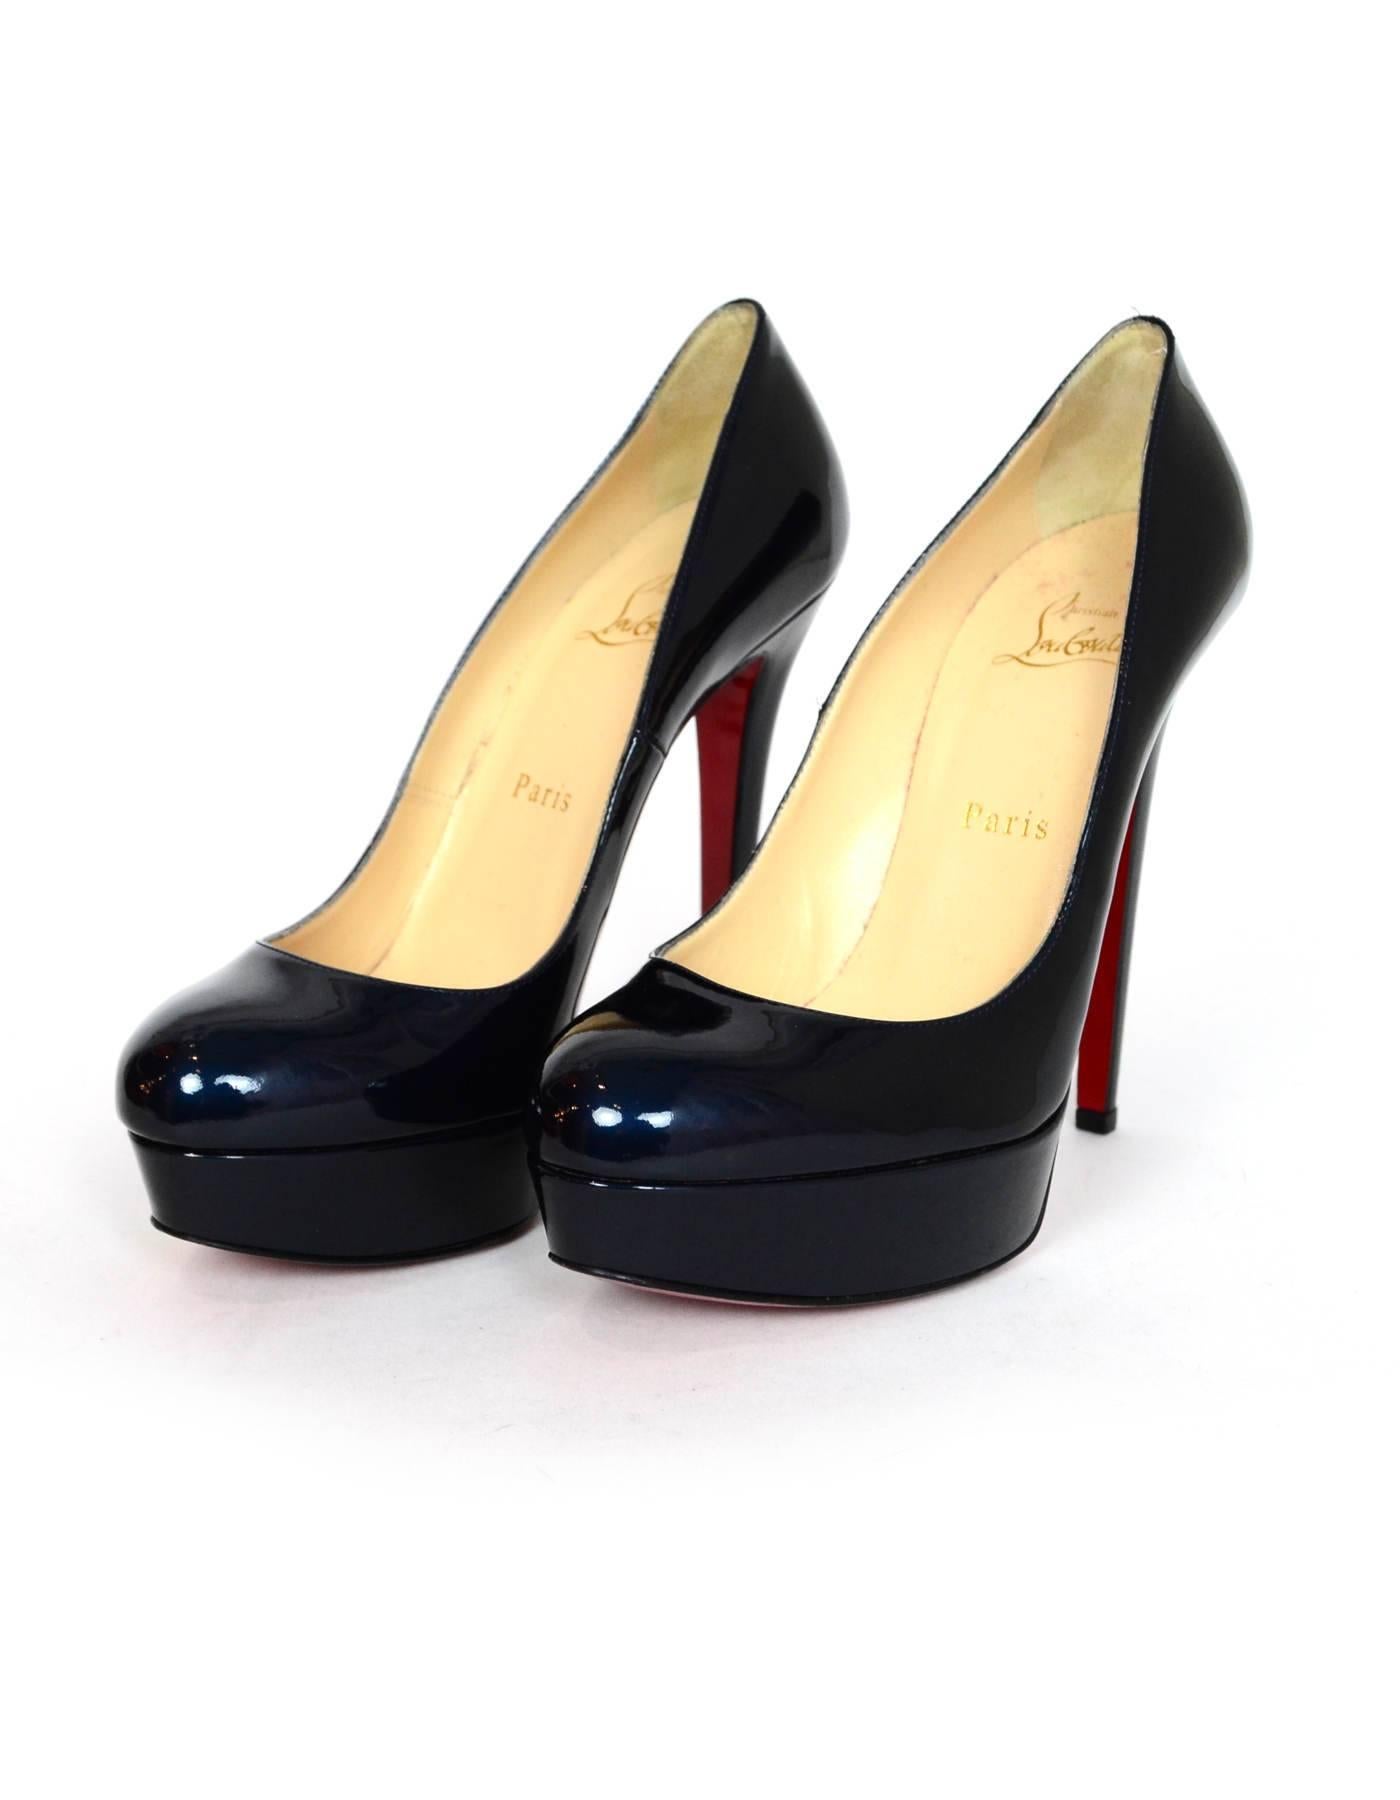 Christian Louboutin Dark Blue Patent Bianca 140mm Pumps Sz 38

Made In: Italy
Color: Dark blue
Materials: Patent leather
Closure/Opening: Slide on
Sole Stamp: Christian Louboutin Made in Italy 38
Retail Price: $875 + tax
Overall Condition: Excellent